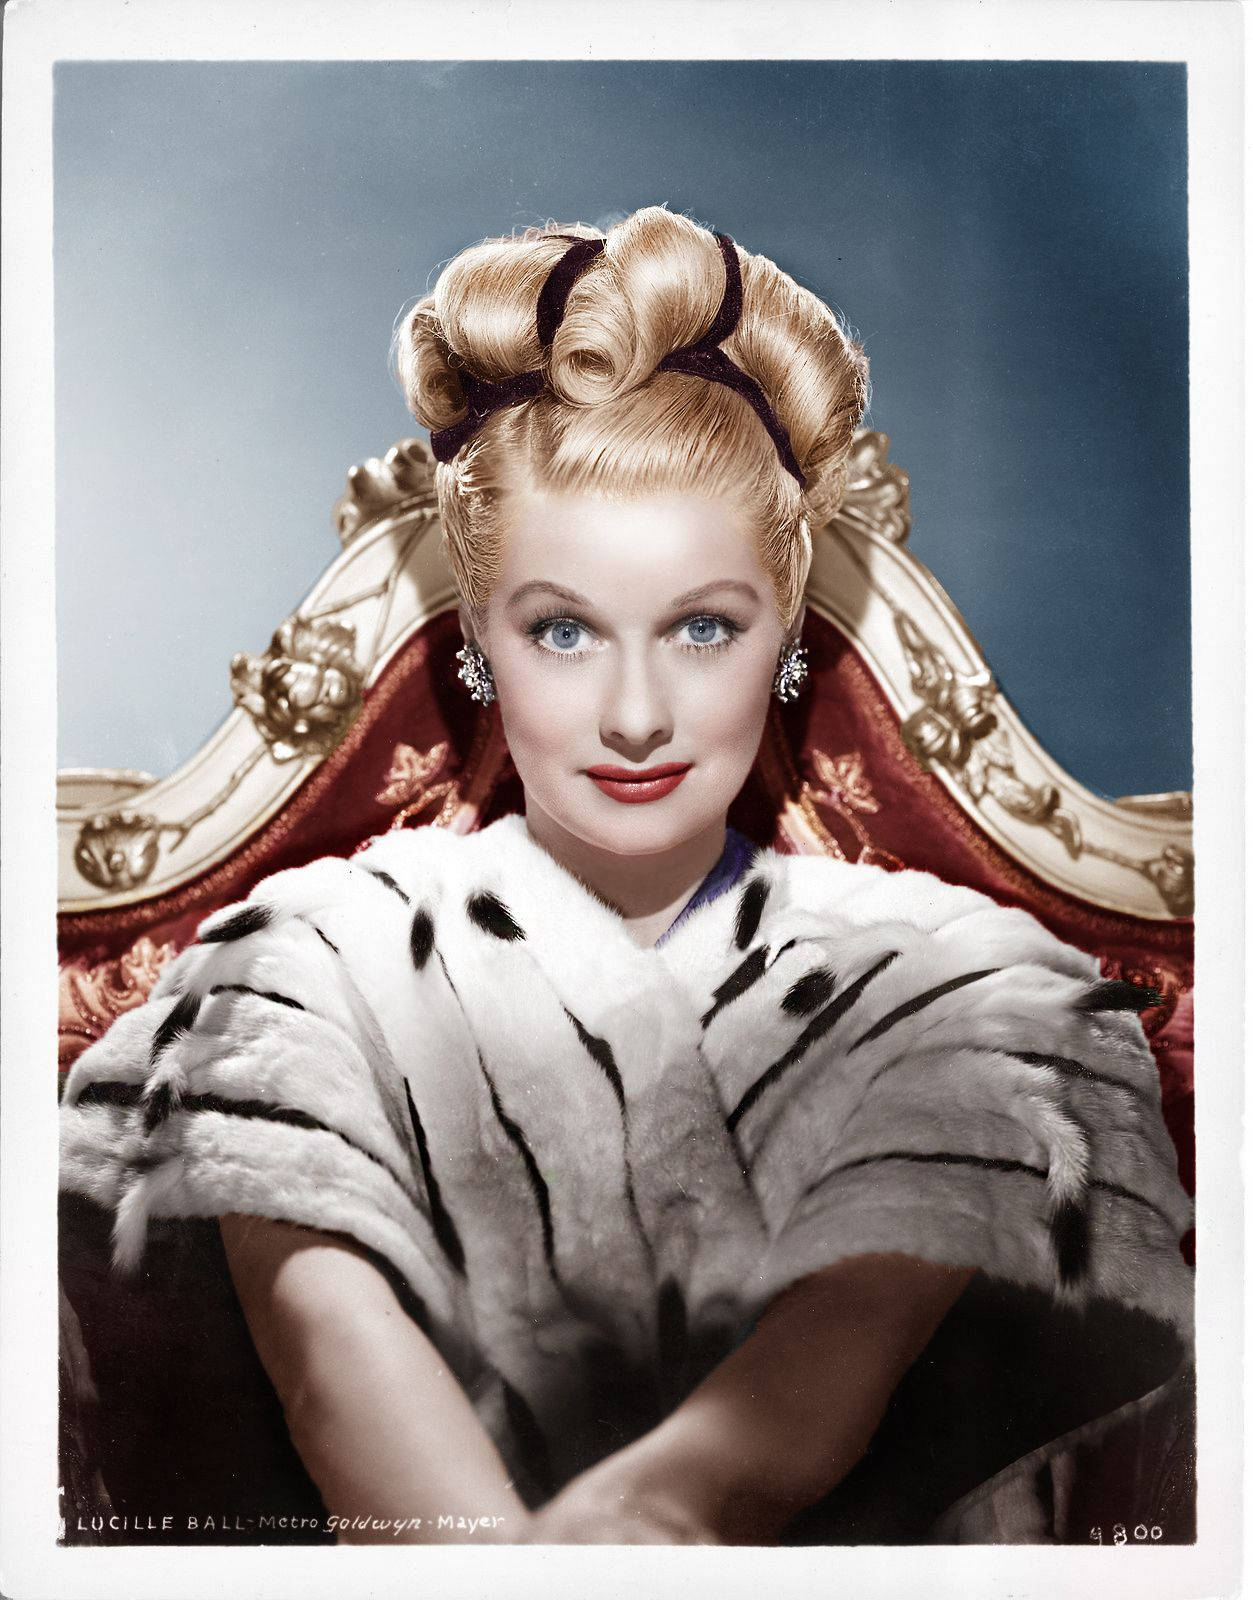 Caption: Lucille Ball Elegantly Sitting On A Red Chair Background